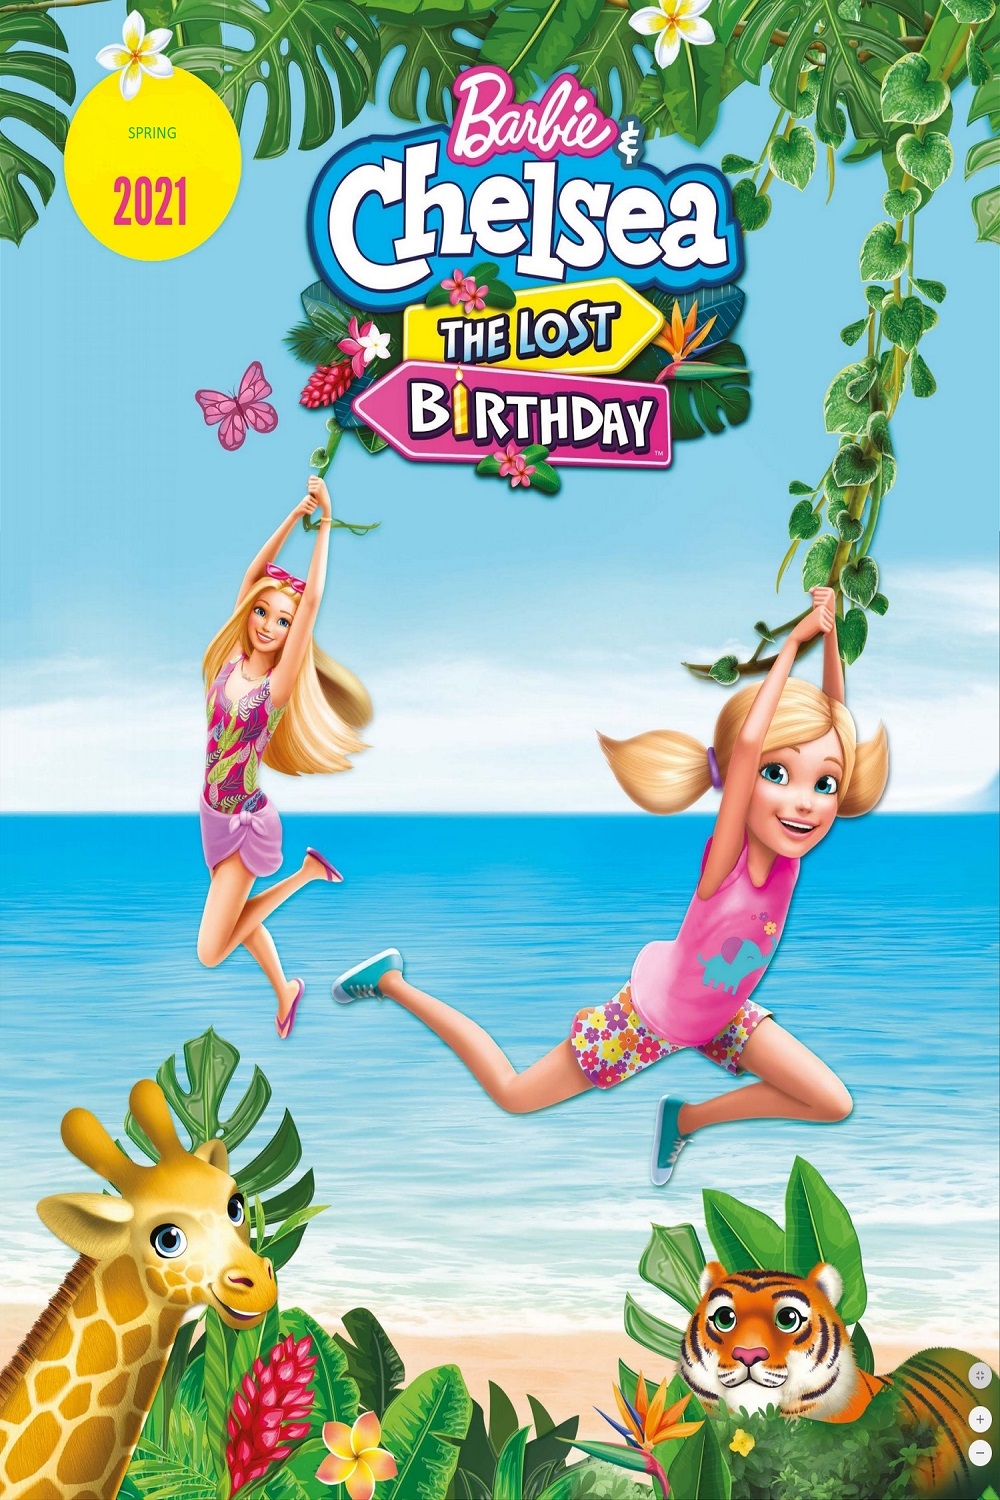 Barbie and Chelsea the Lost Birthday (2021) Full Movie Watch Online